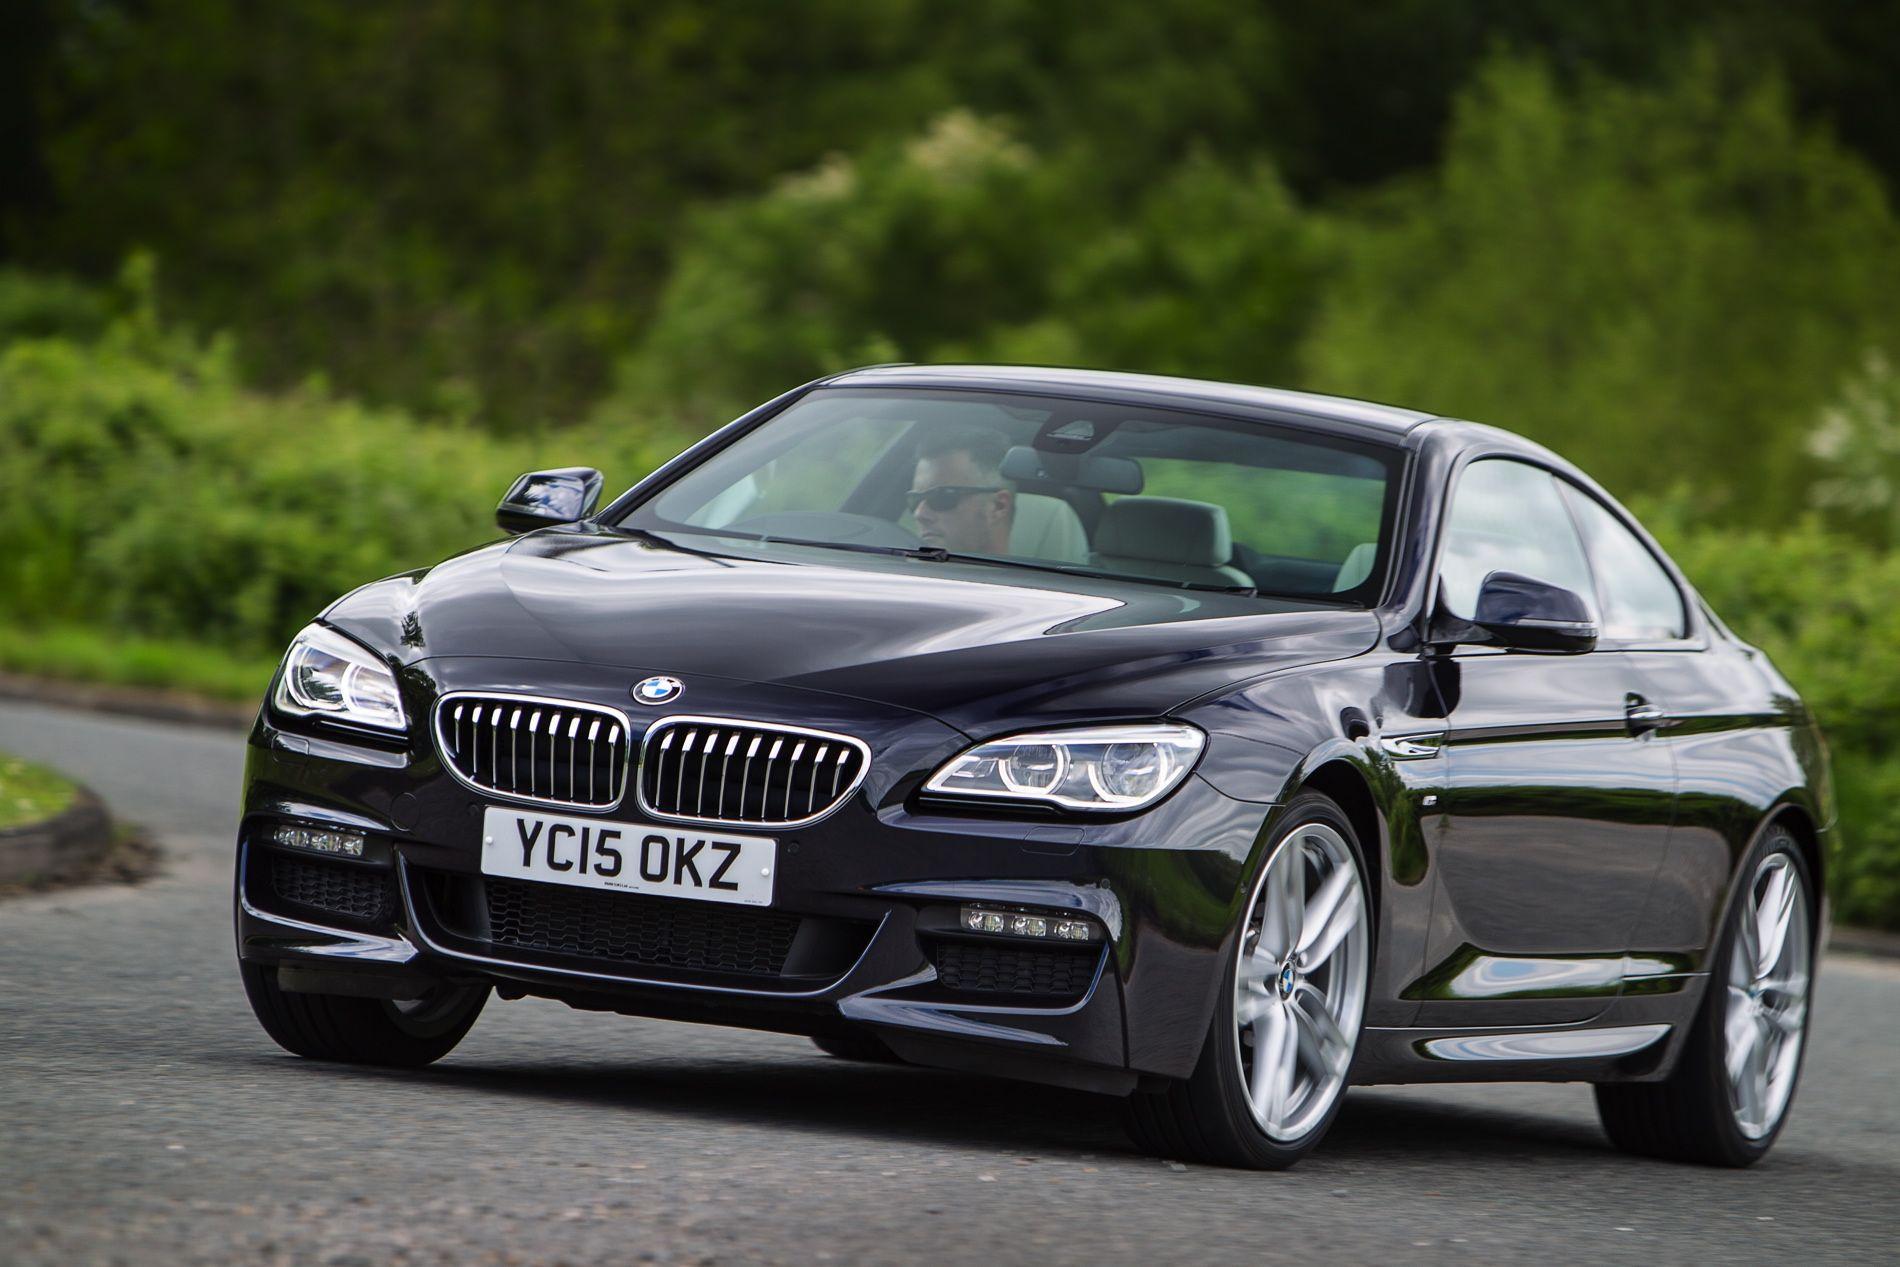 BMW 6 Series Coupe, Convertible, Gran Coupe